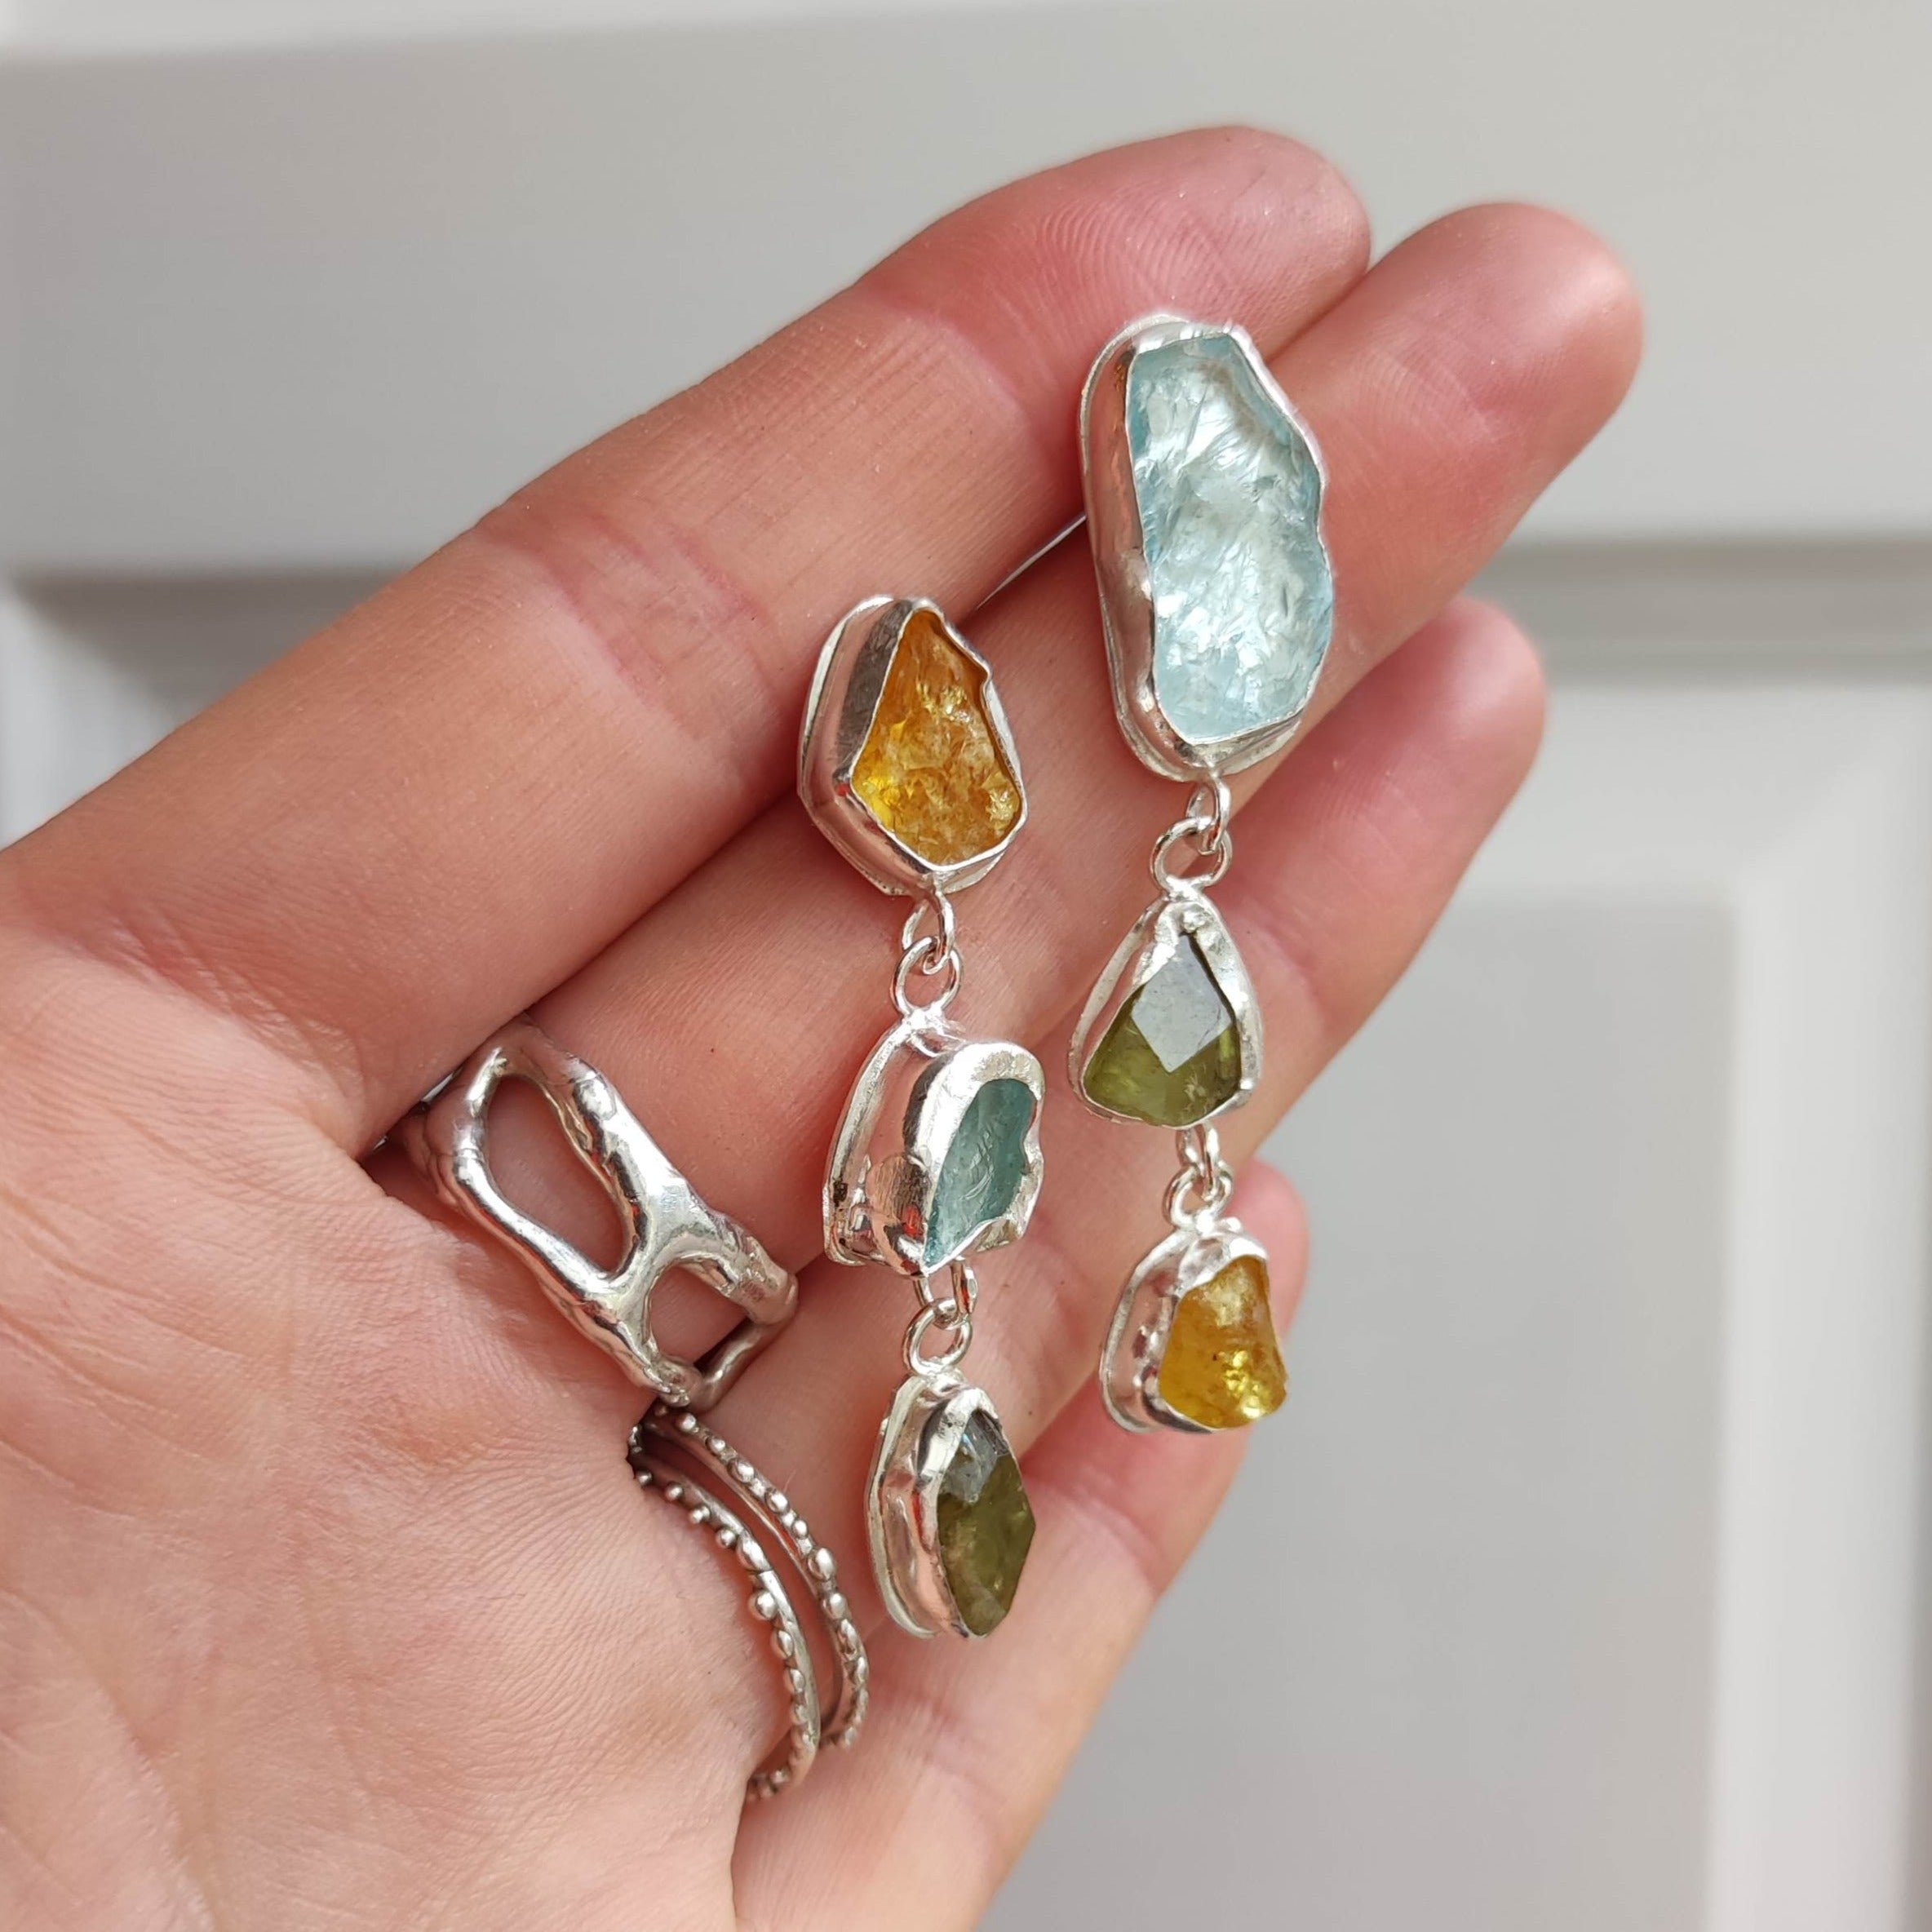 These stunning, one-of-a-kind earrings feature raw Aquamarine, Sphene and Golden Beryl stones. Each one encourages protection, abundance and promotes a healthy life.